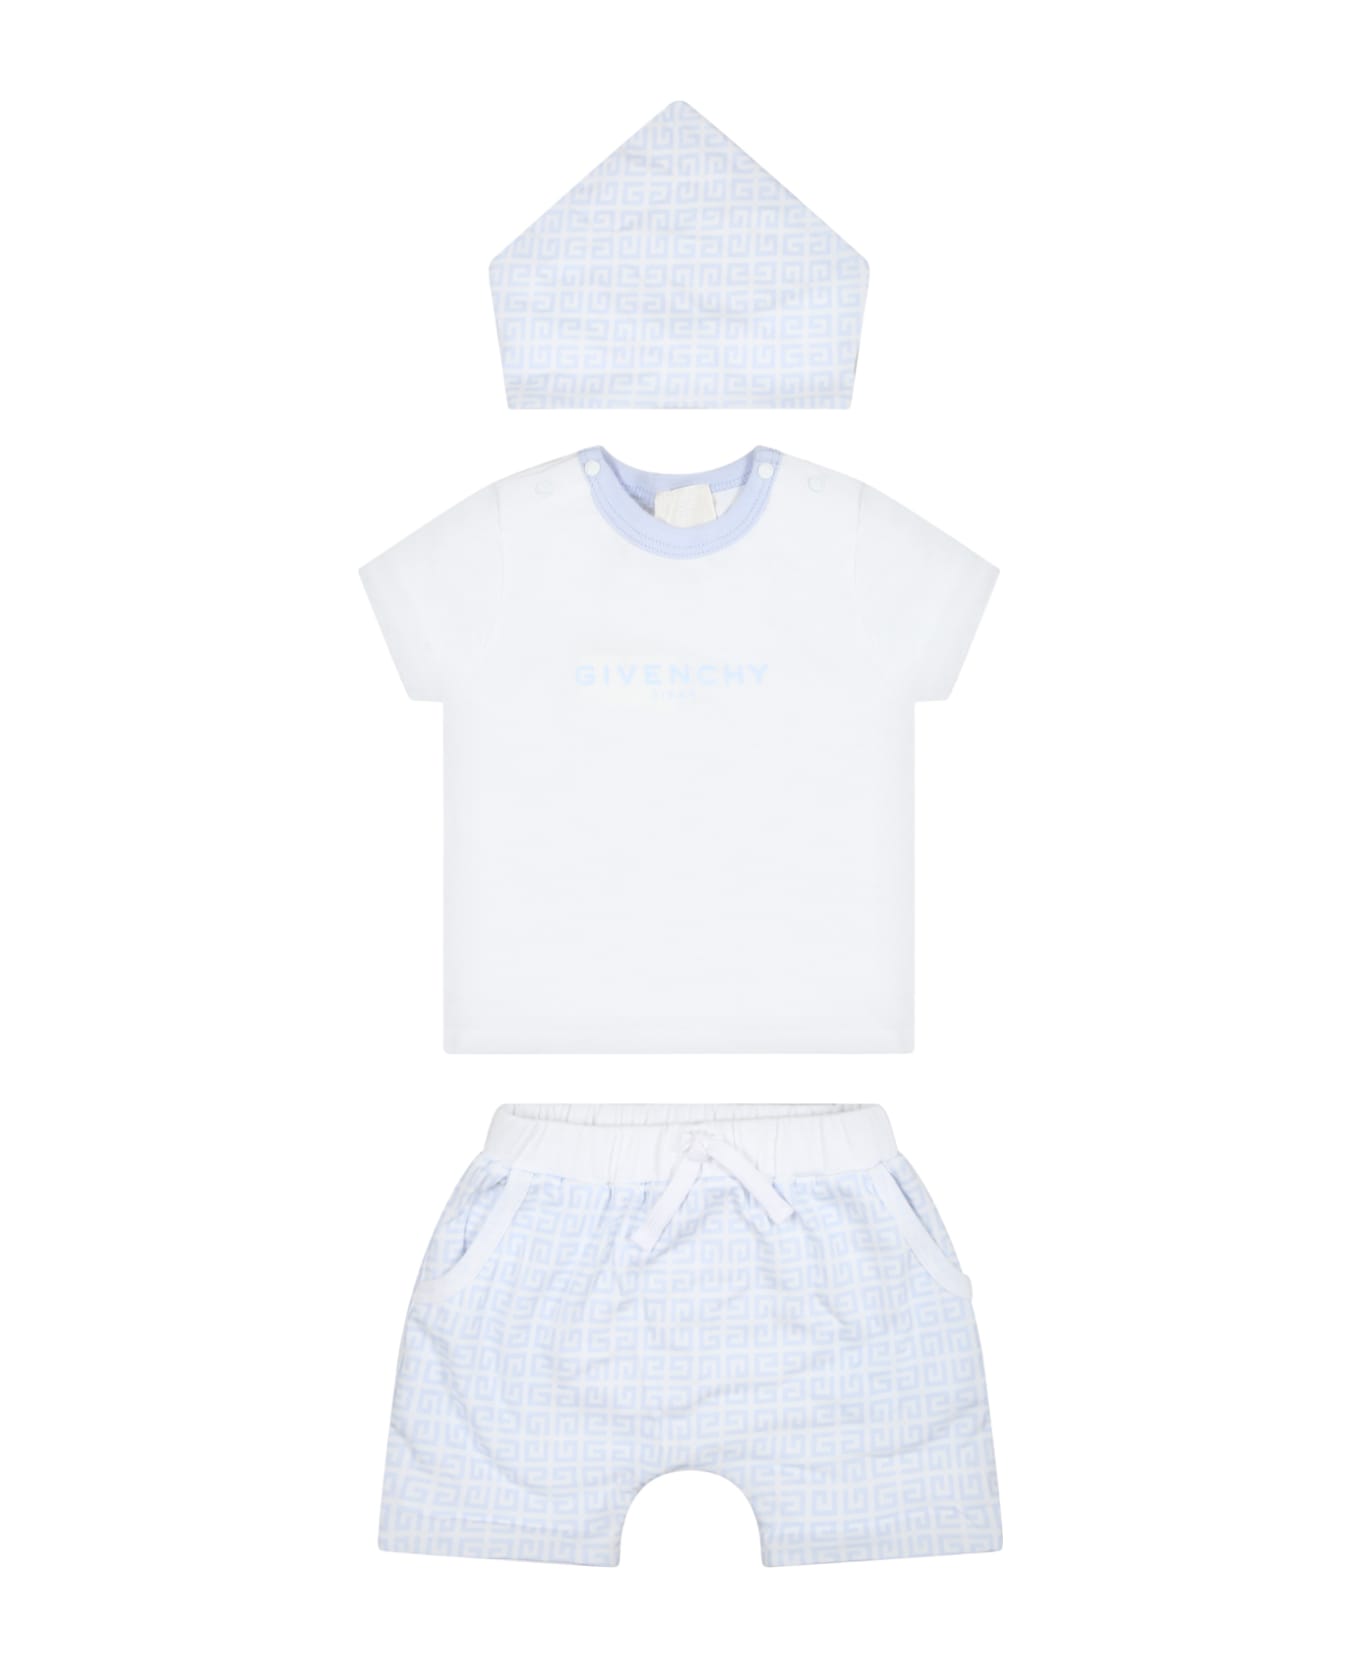 Givenchy Multicolor Set For Baby Boy With Logo - Light Blue ボトムス